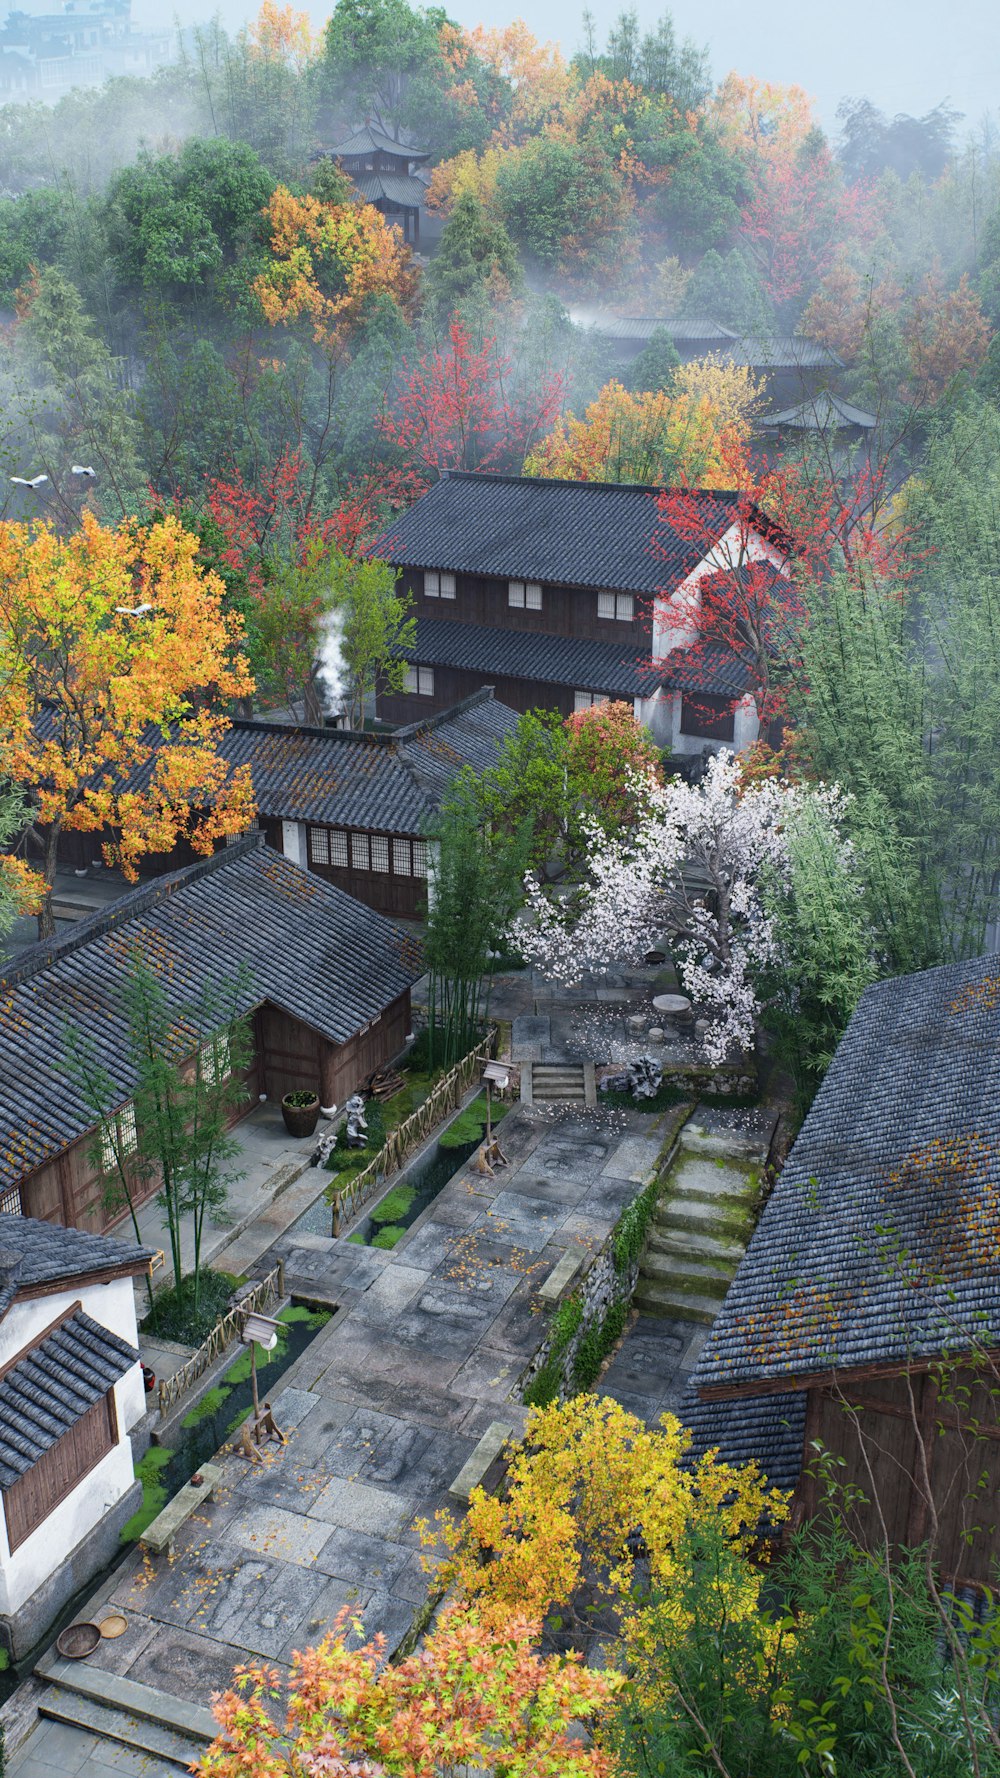 an aerial view of a village in autumn